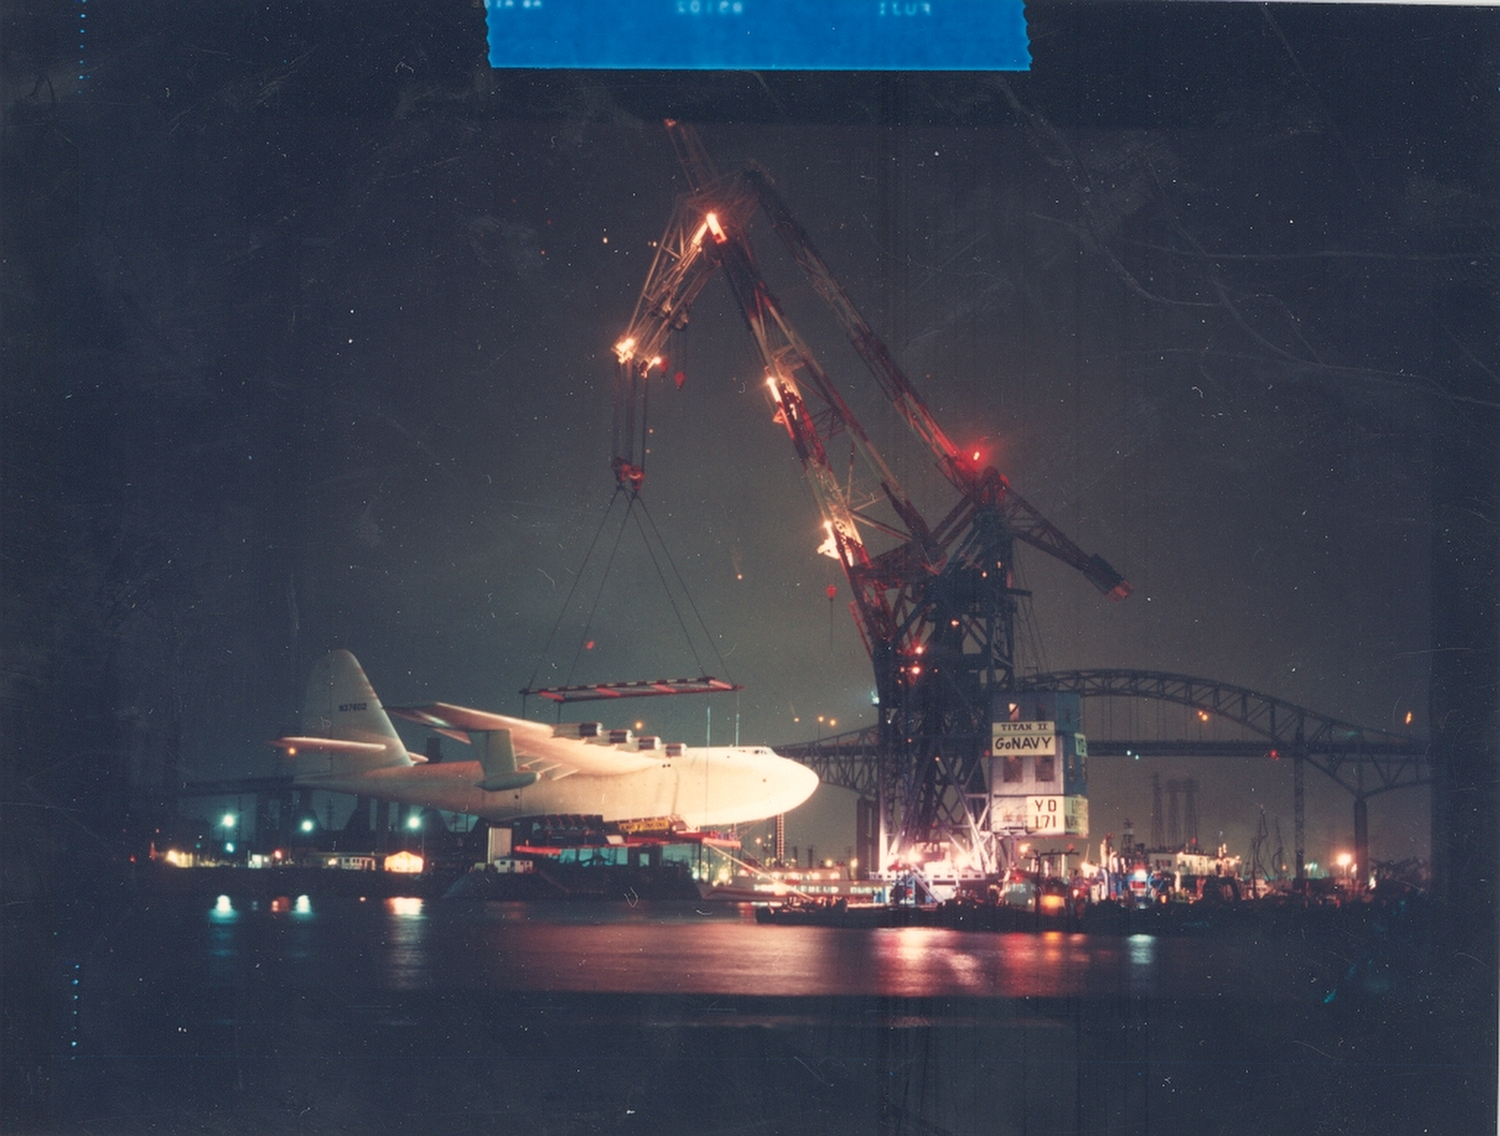 Floating crane Herman the German lifts the Spruce Goose as part of its move into its dome next to the Queen Mary in 1982.